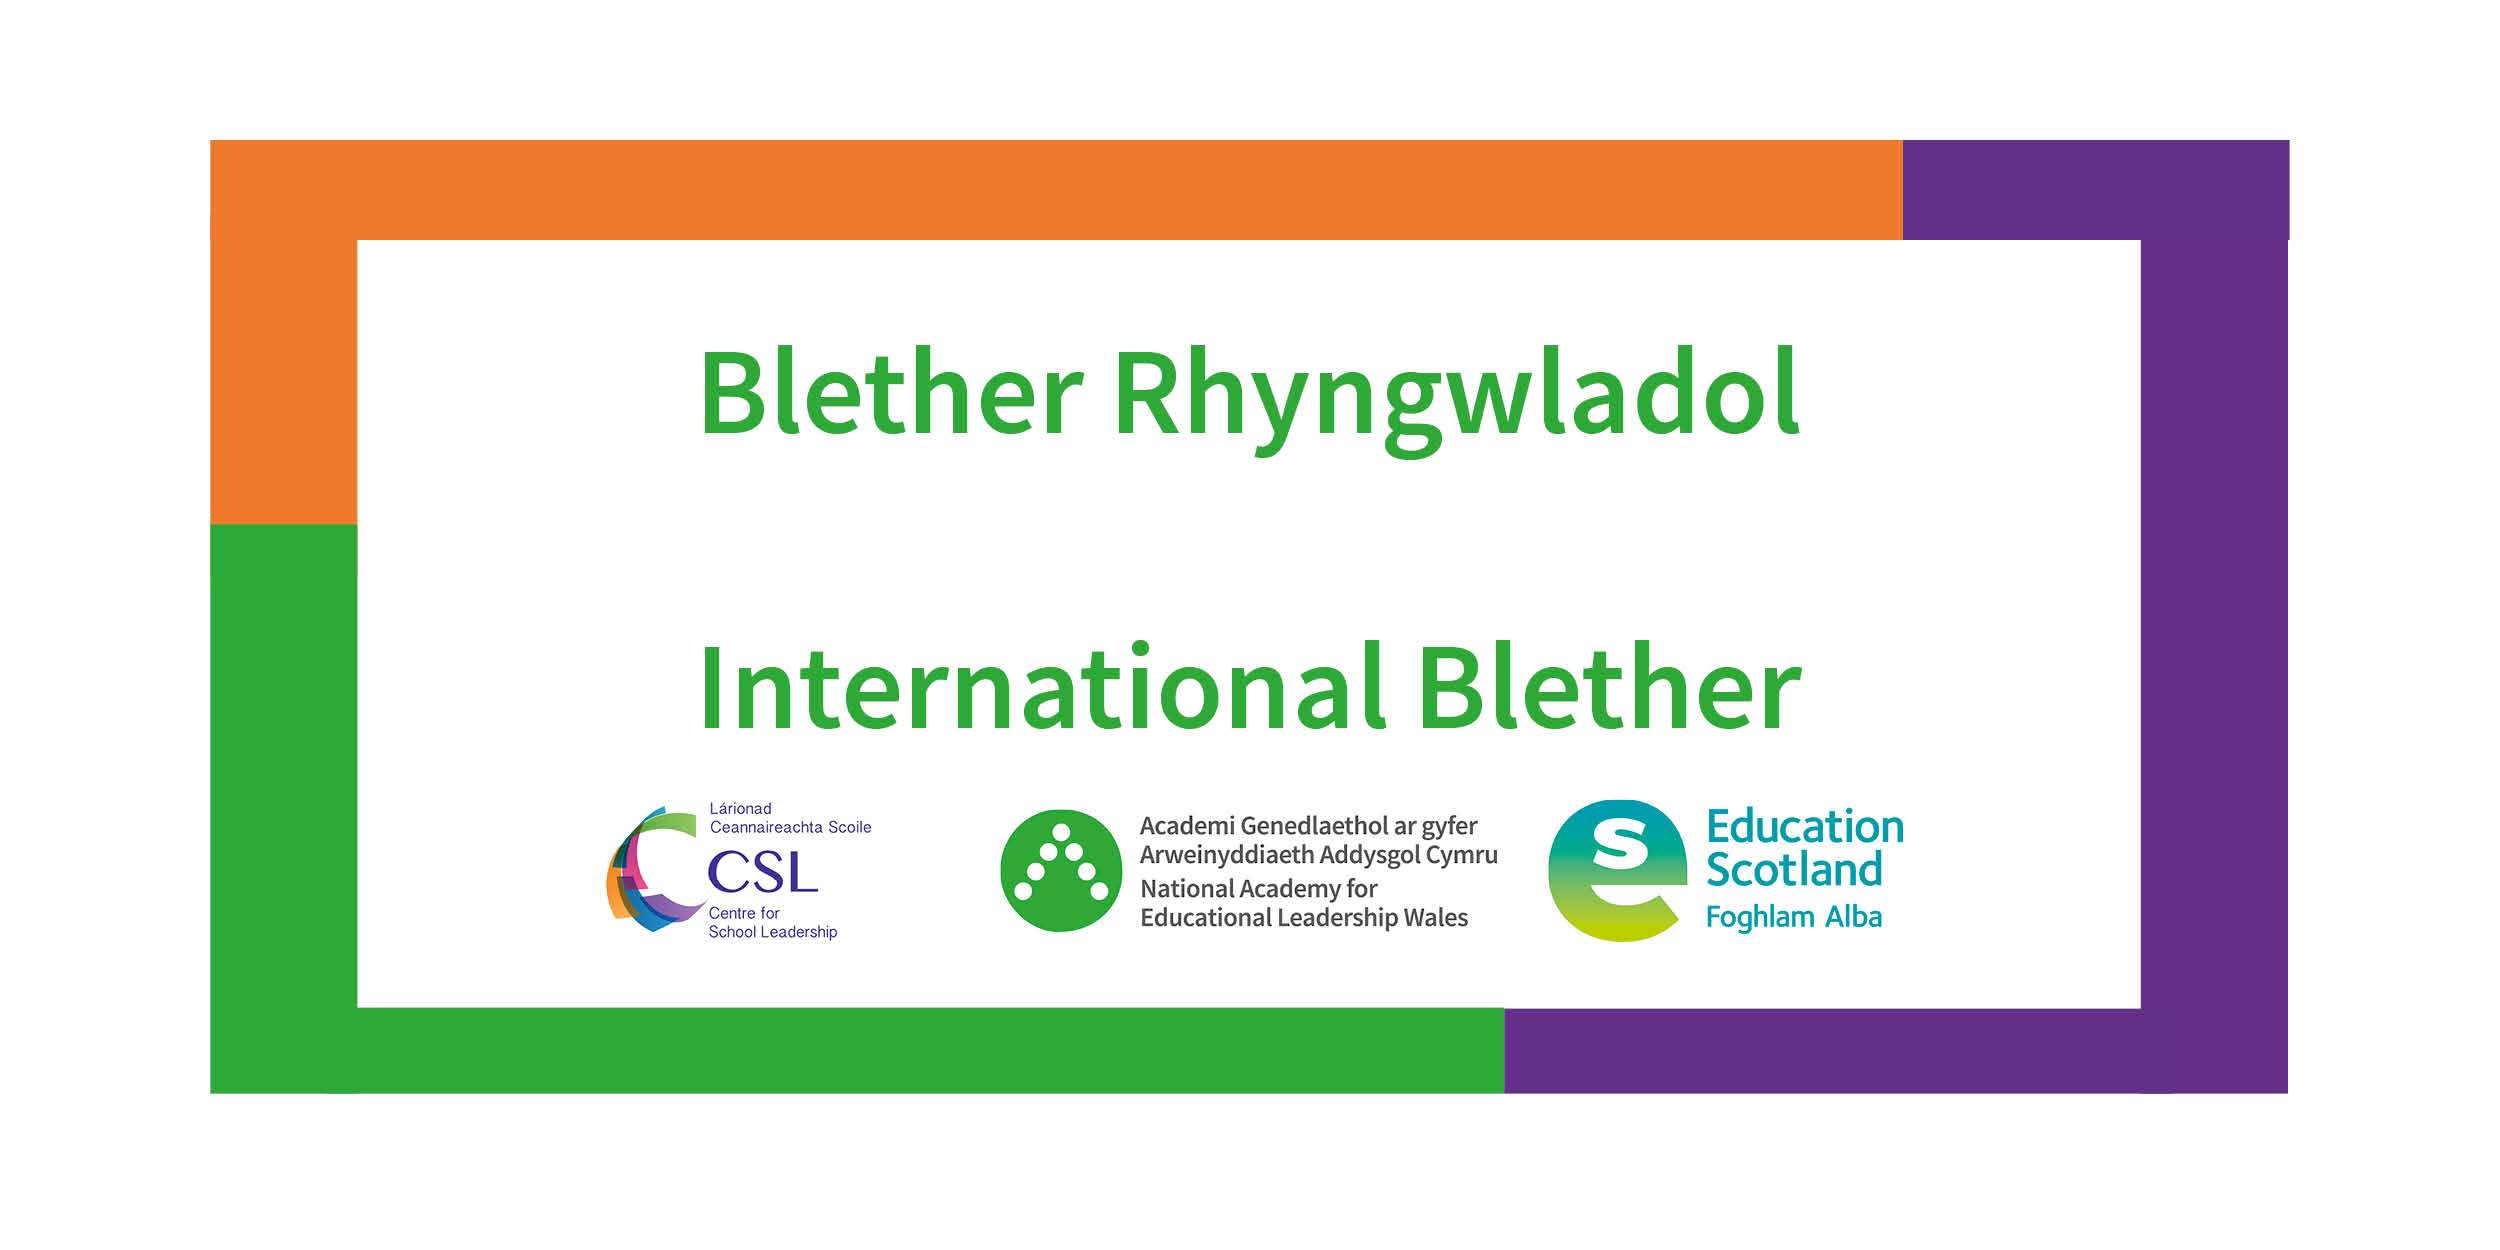 International Blether: Leading Enquiry and Professional Learning in Schools